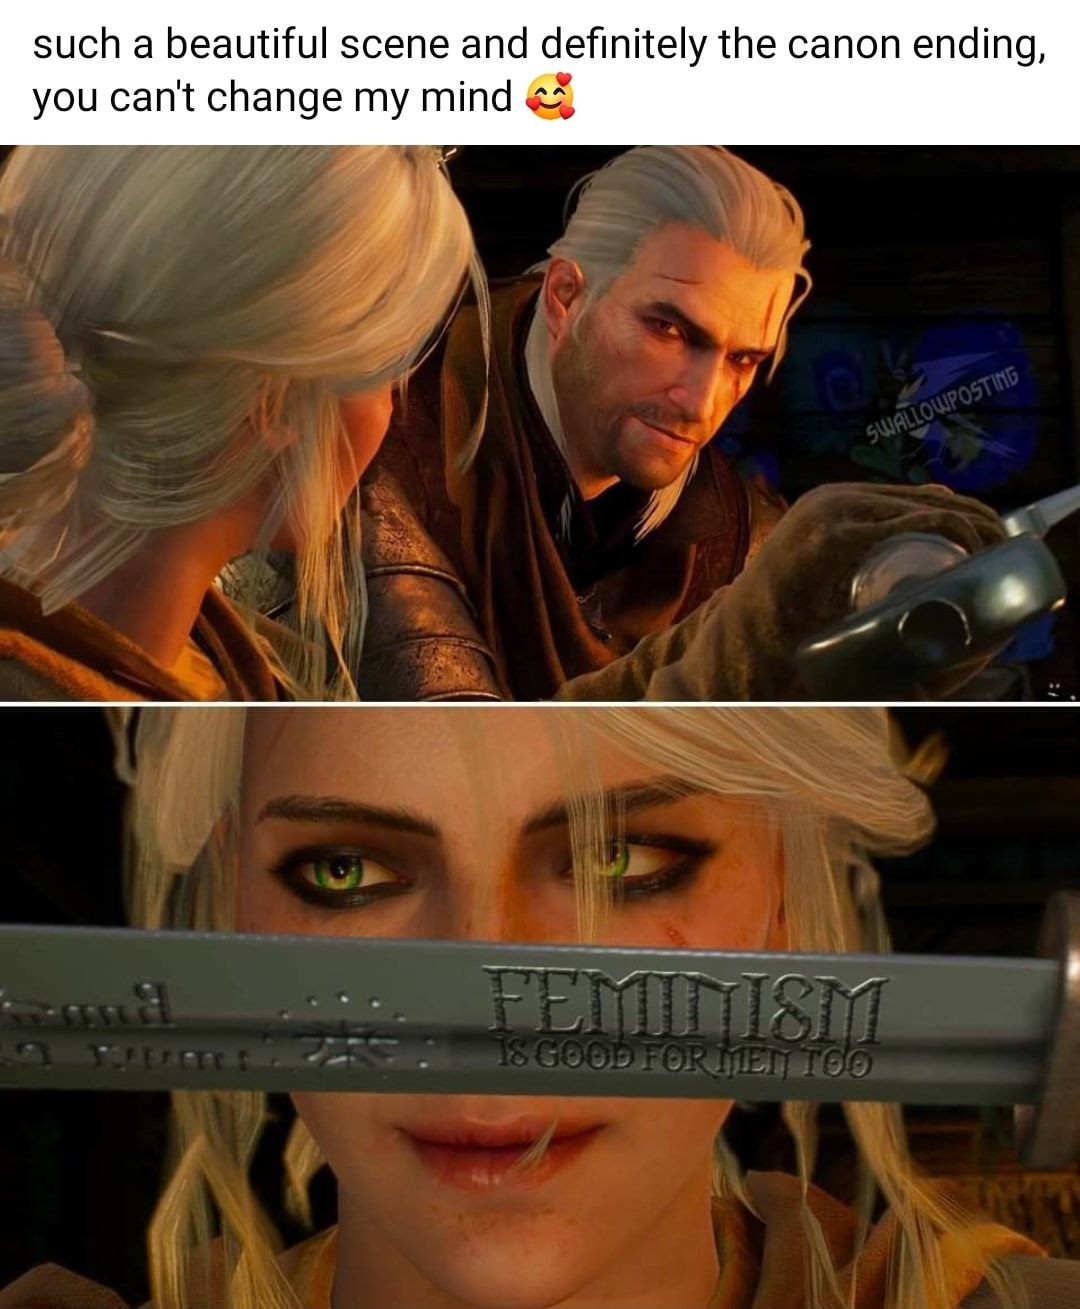 Witcher memes - blond - such a beautiful scene and definitely the canon ending, you can't change my mind Swallowposting Femmism Is Good Forjen Too